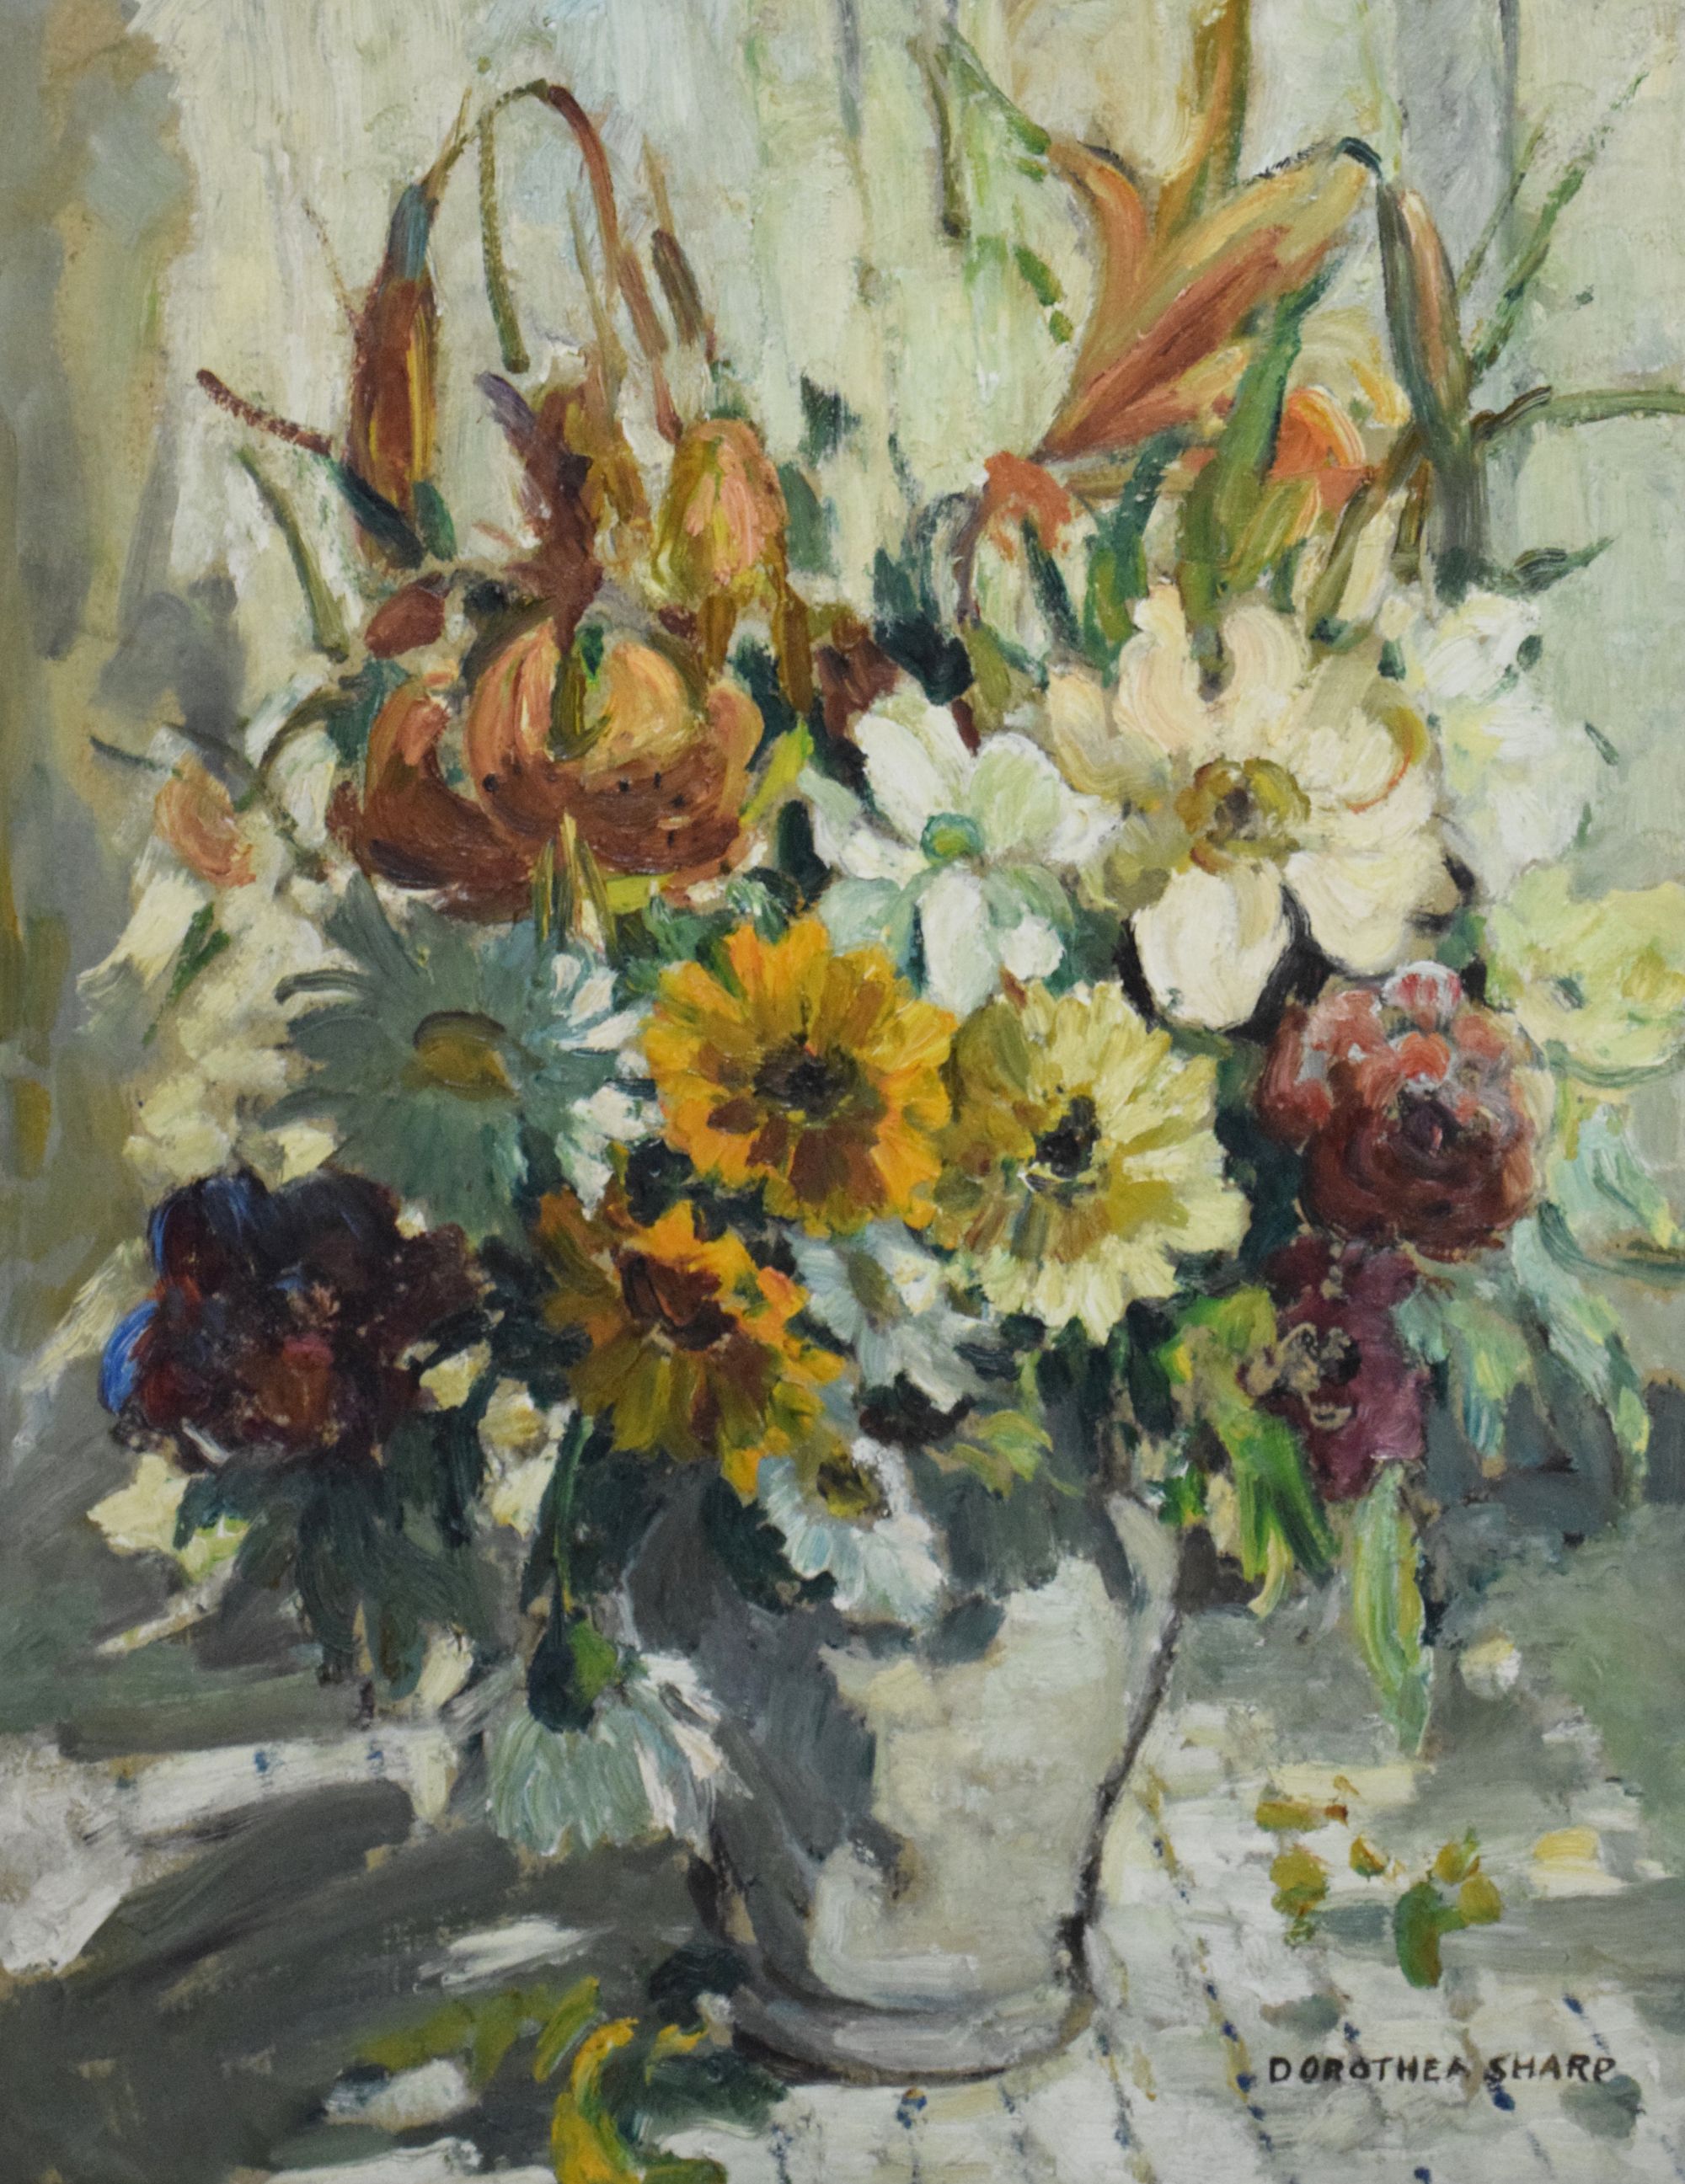 Dorothea Sharp R.B.A., R.O.I. (1874-1955) - Oil on board - Still life with flowers. Sold for £7,500